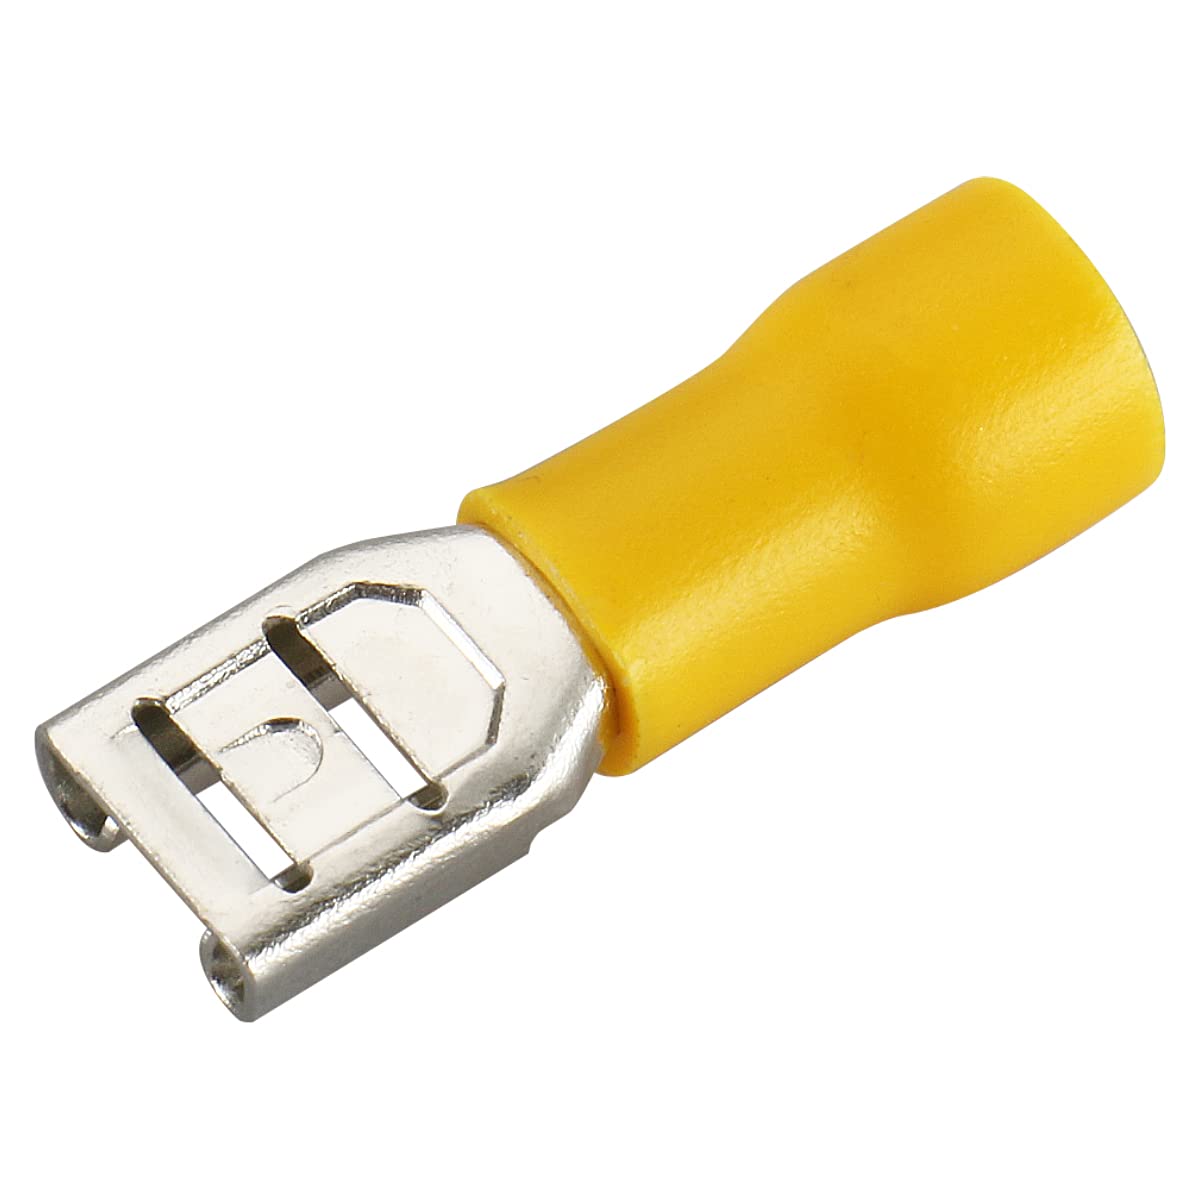 Female Quick disconnects Vinyl Insulated Spade Wire Connector Electrical Crimp Terminal 12-10 AWG Yellow Pack of 100